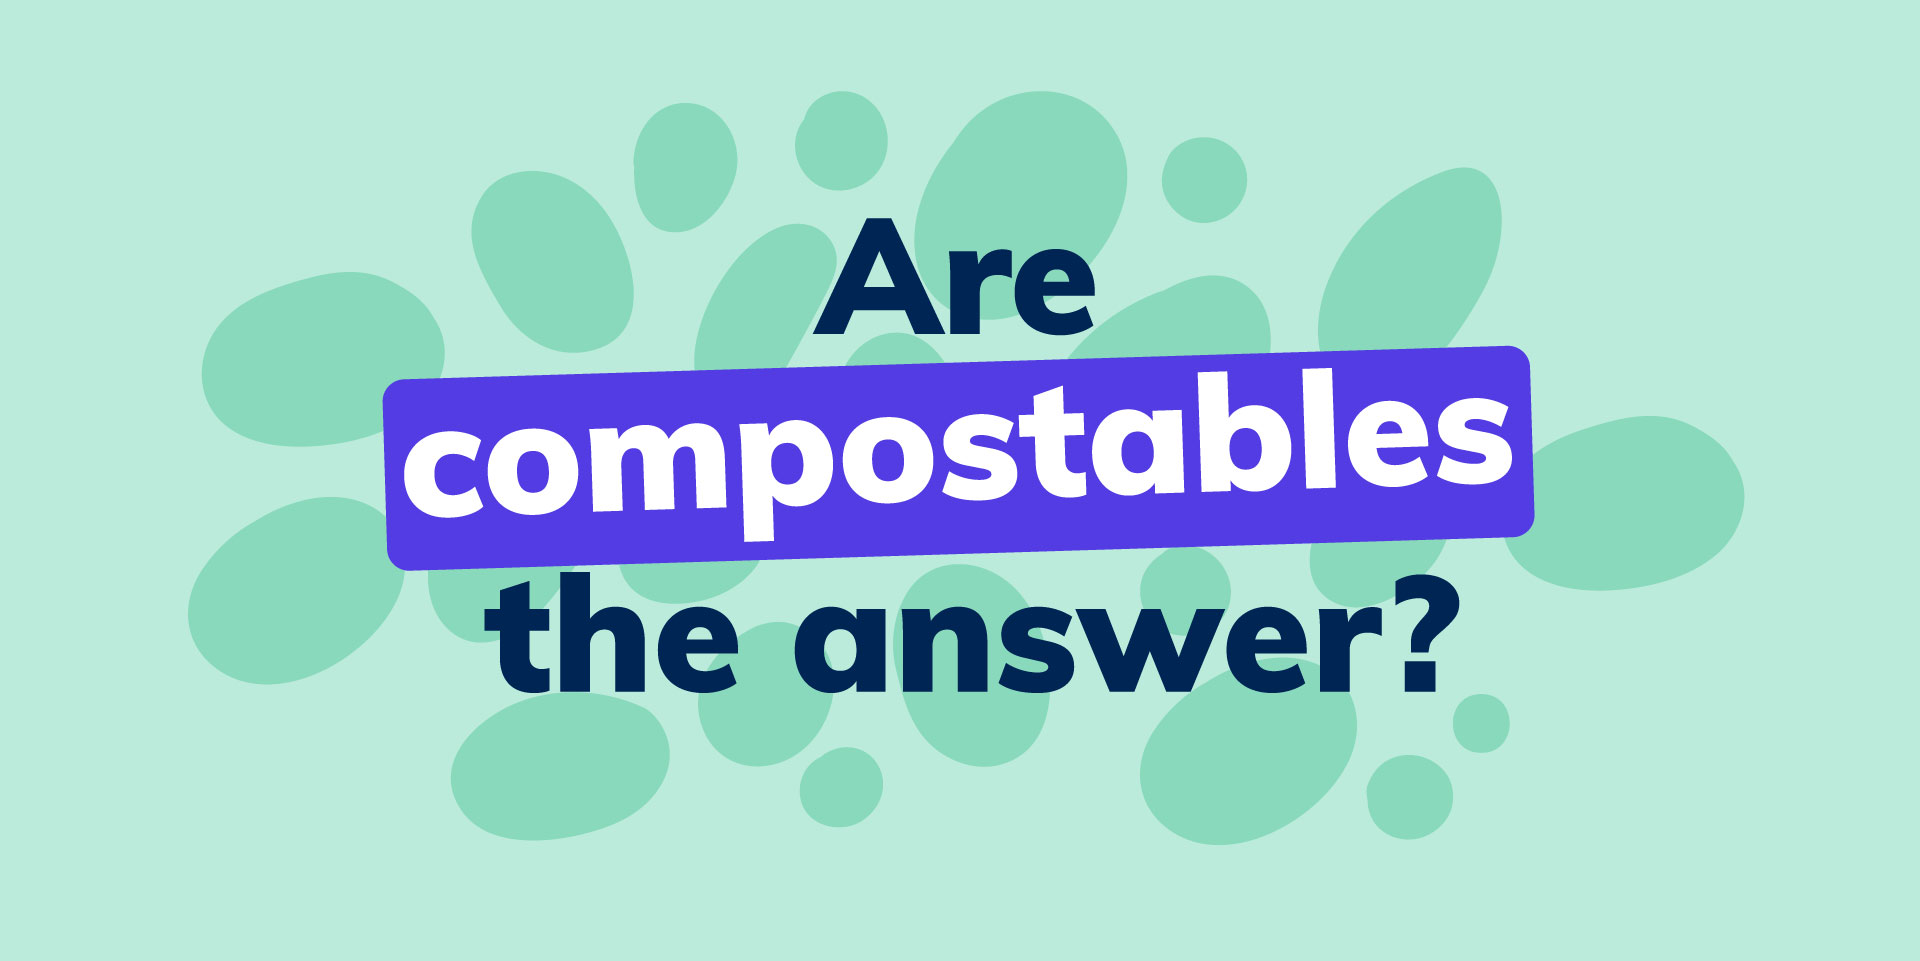 Are compostables the answer?